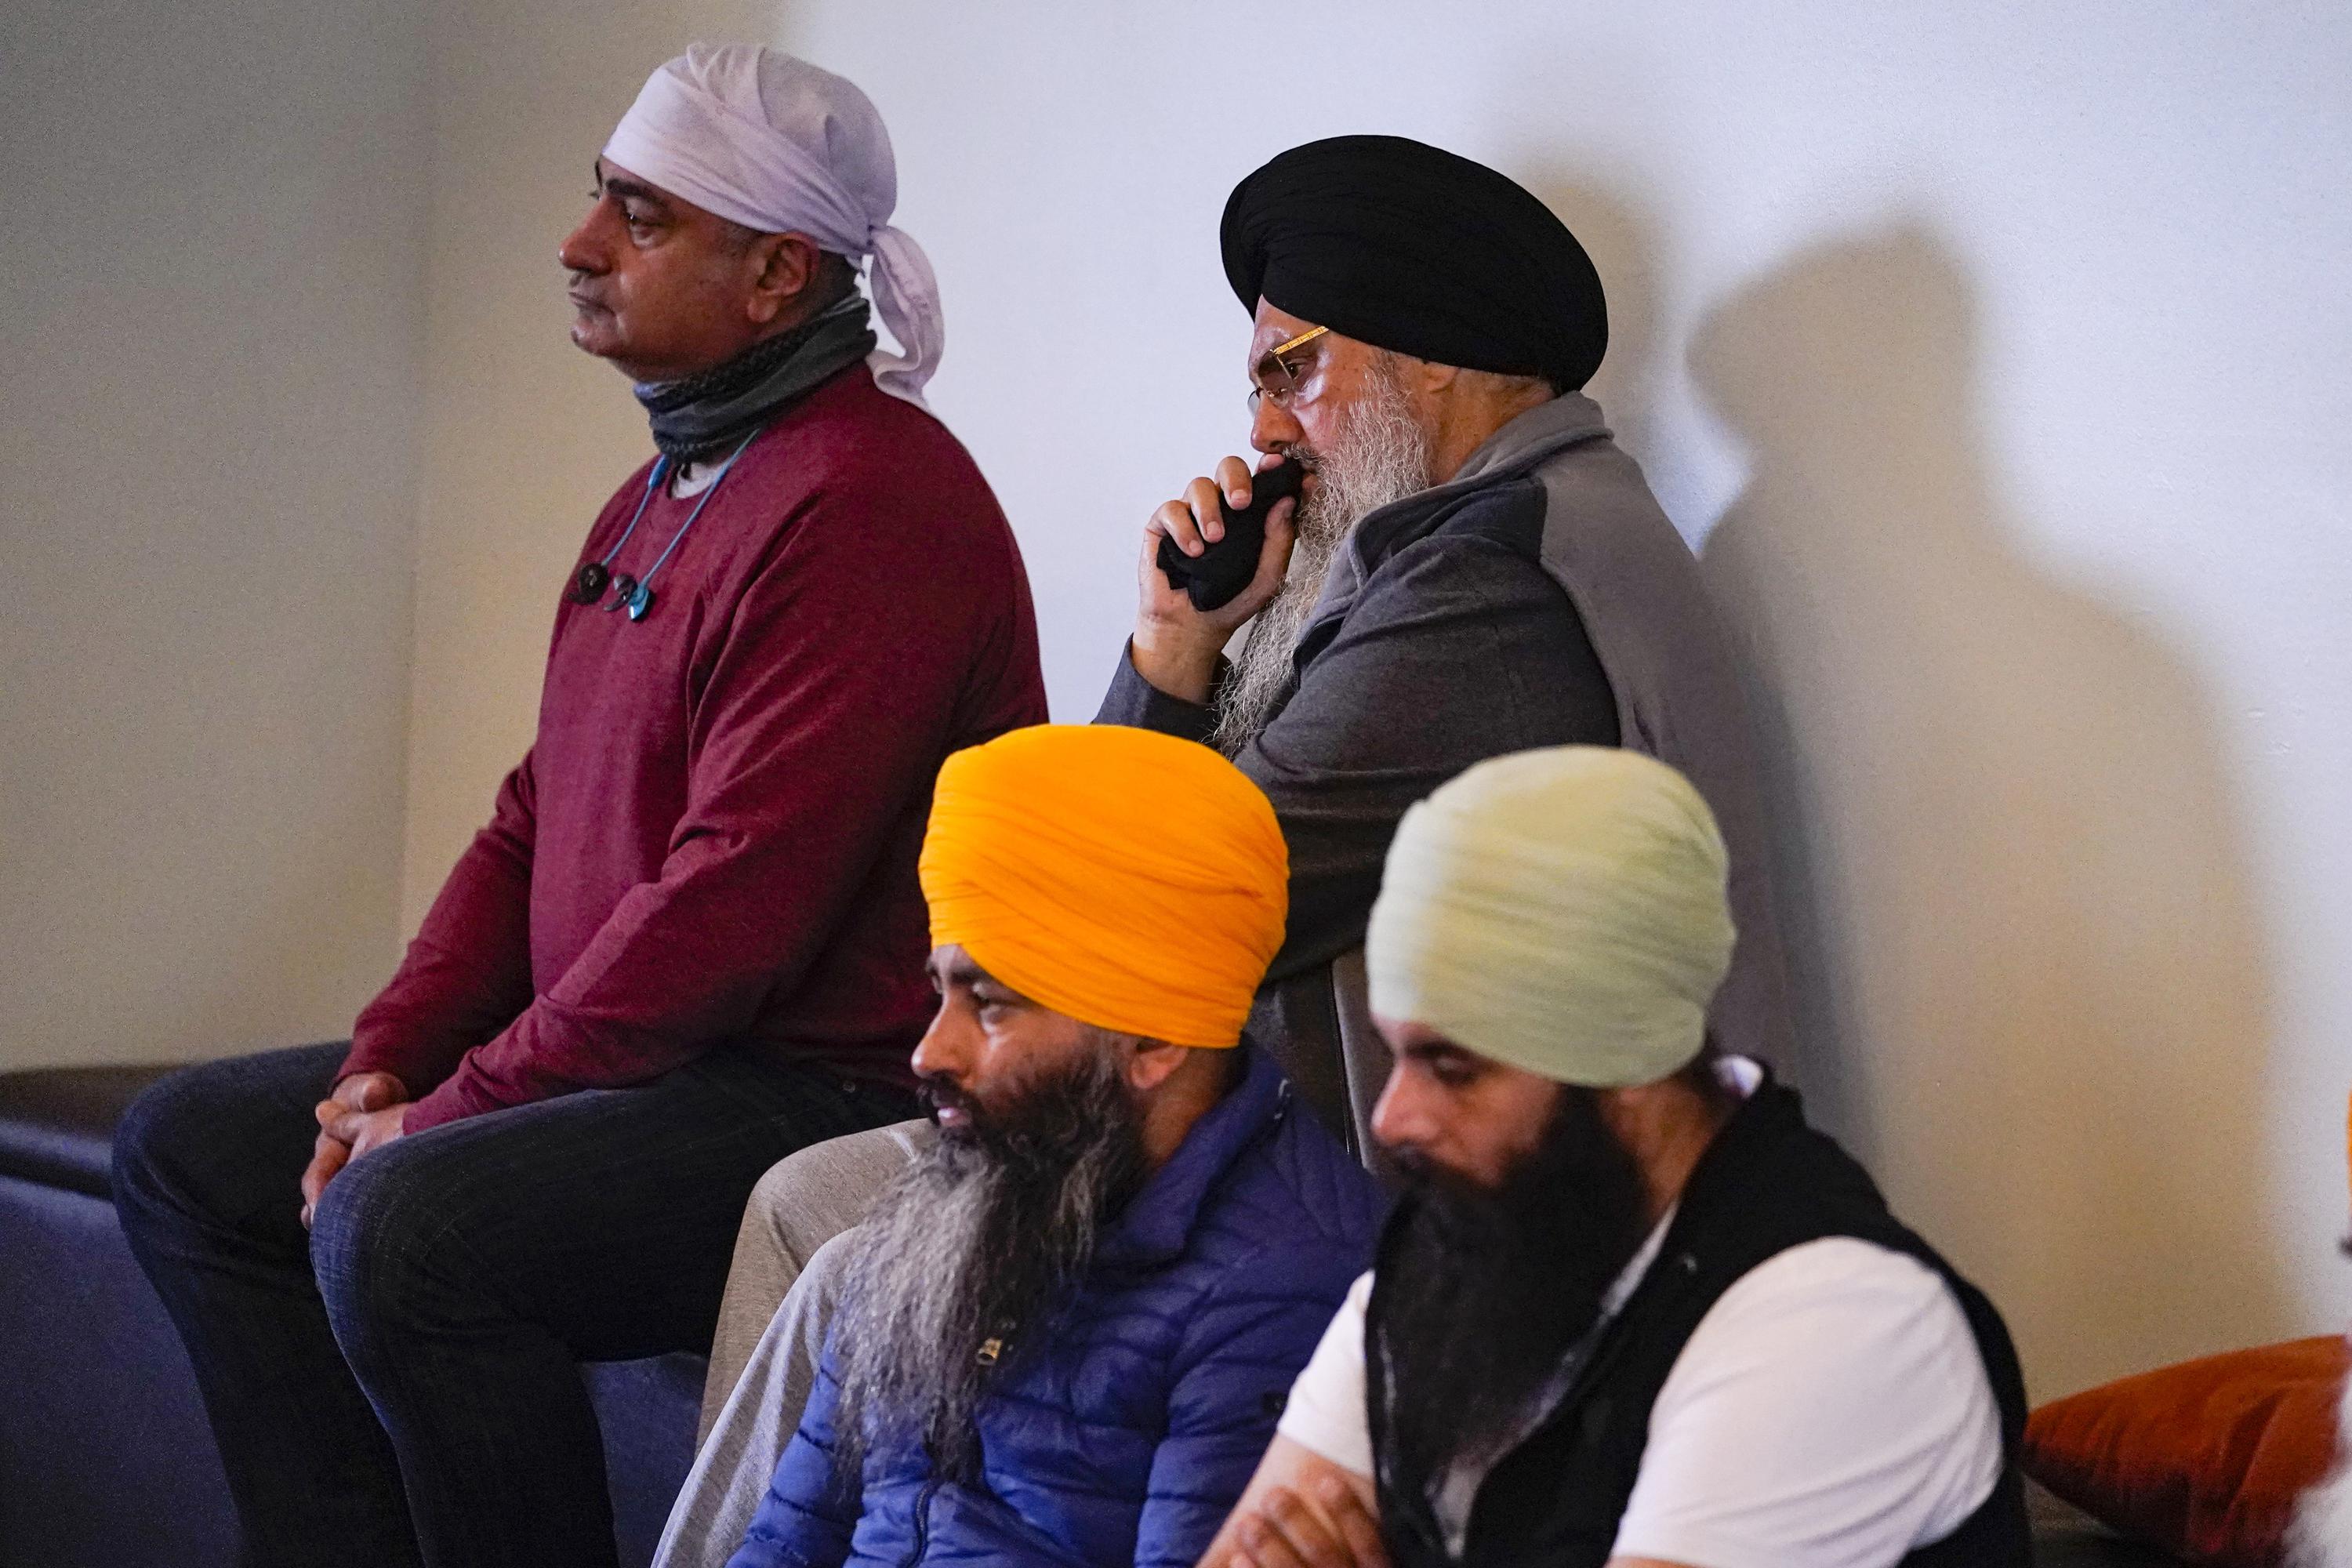 US Sikh community traumatized by another mass shooting